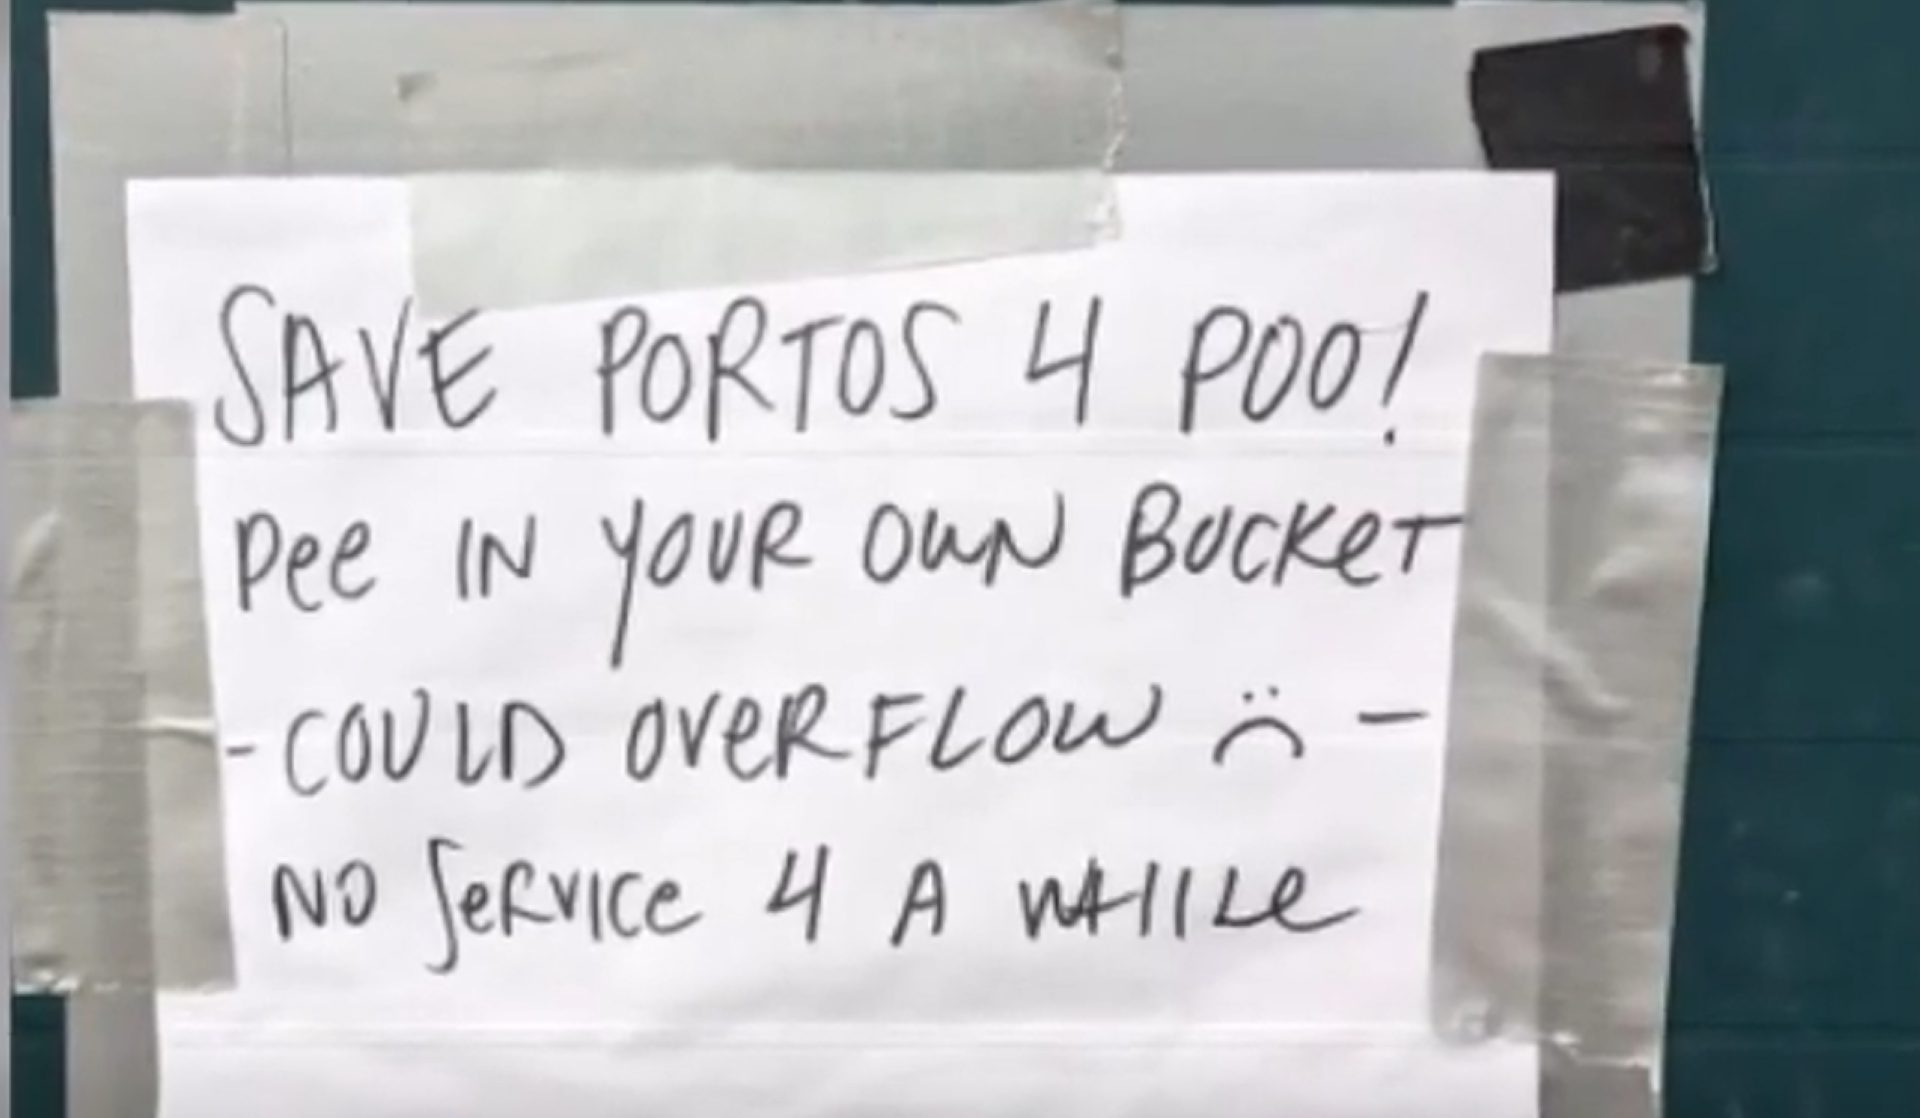 The port-a-potties couldn't be serviced